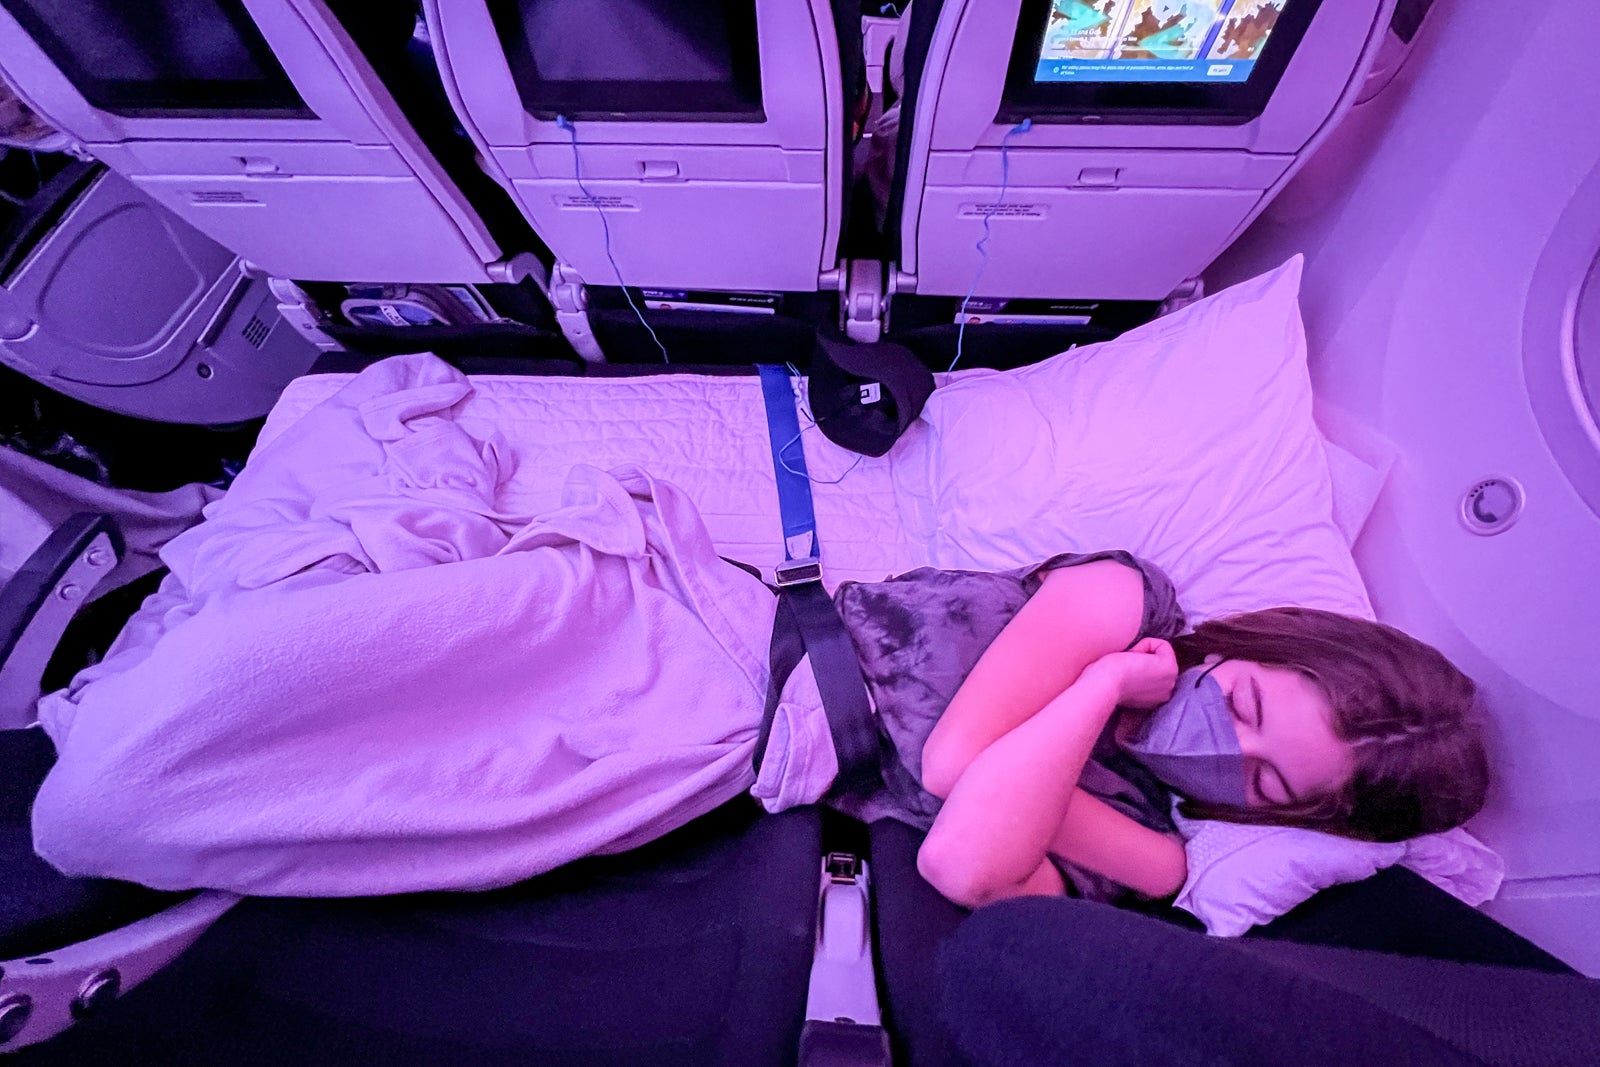 I flew 14 hours on a 'couch' — Here's whether Air New Zealand's Skycouch was worth it